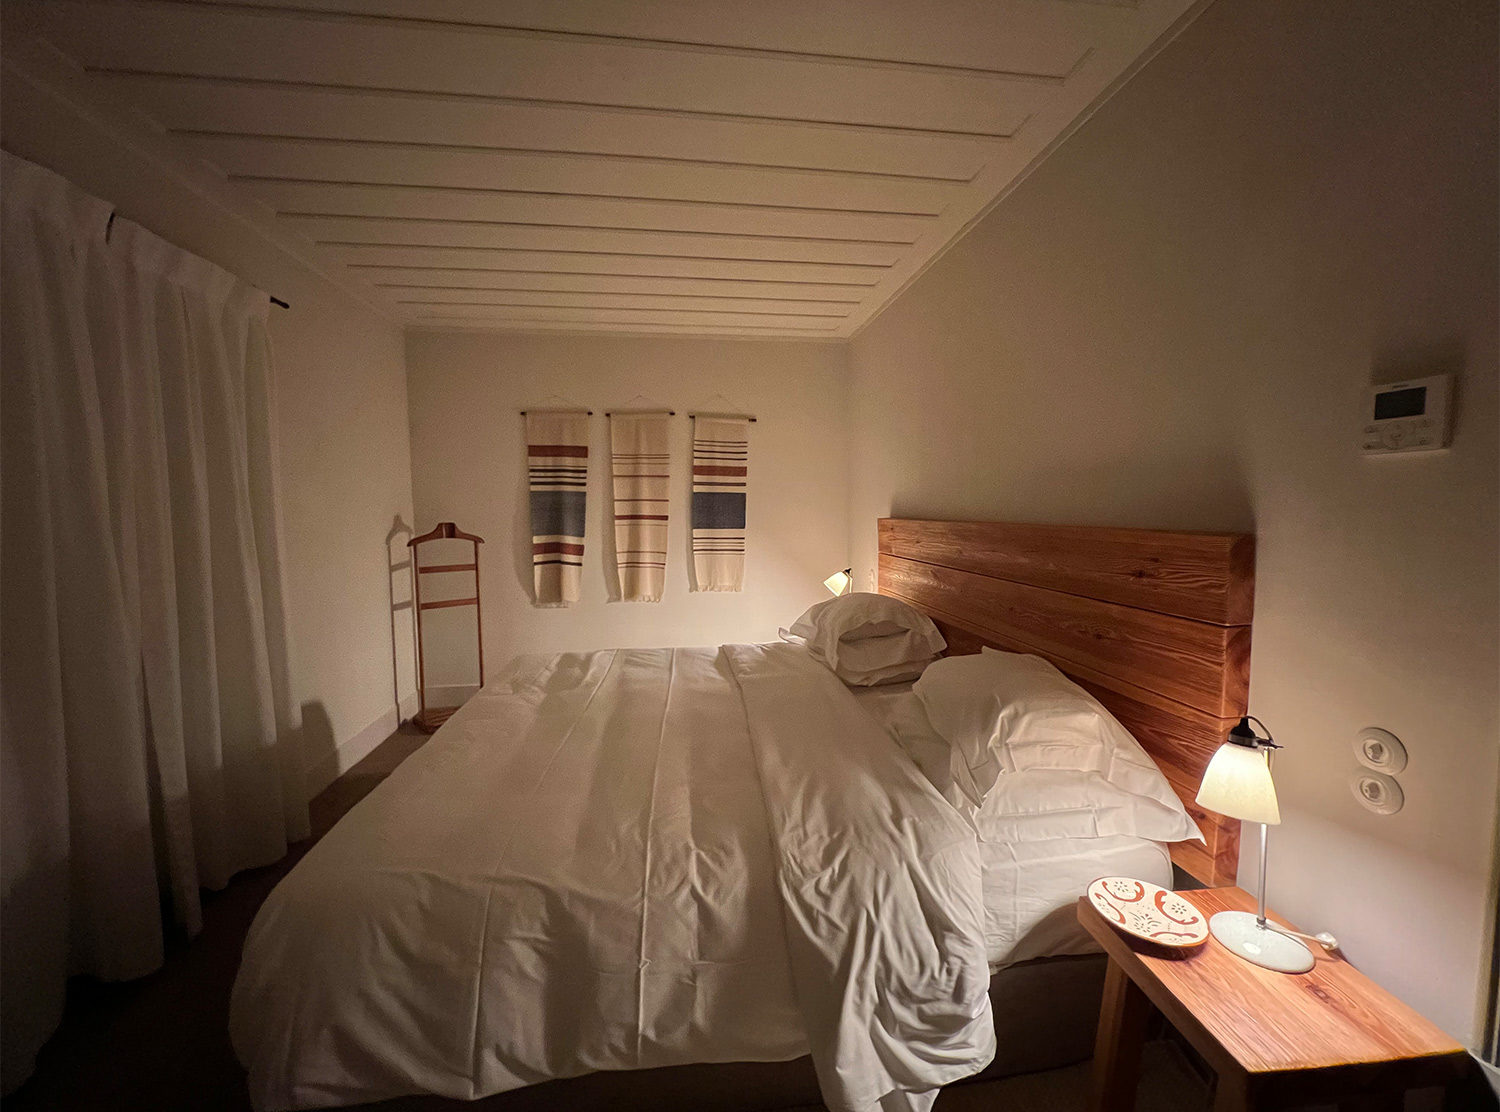 São Lourenço do Barrocal The hotel’s 5 star status can be felt in the soft, luxurious bedding. I open the windows to be woken by birdsong